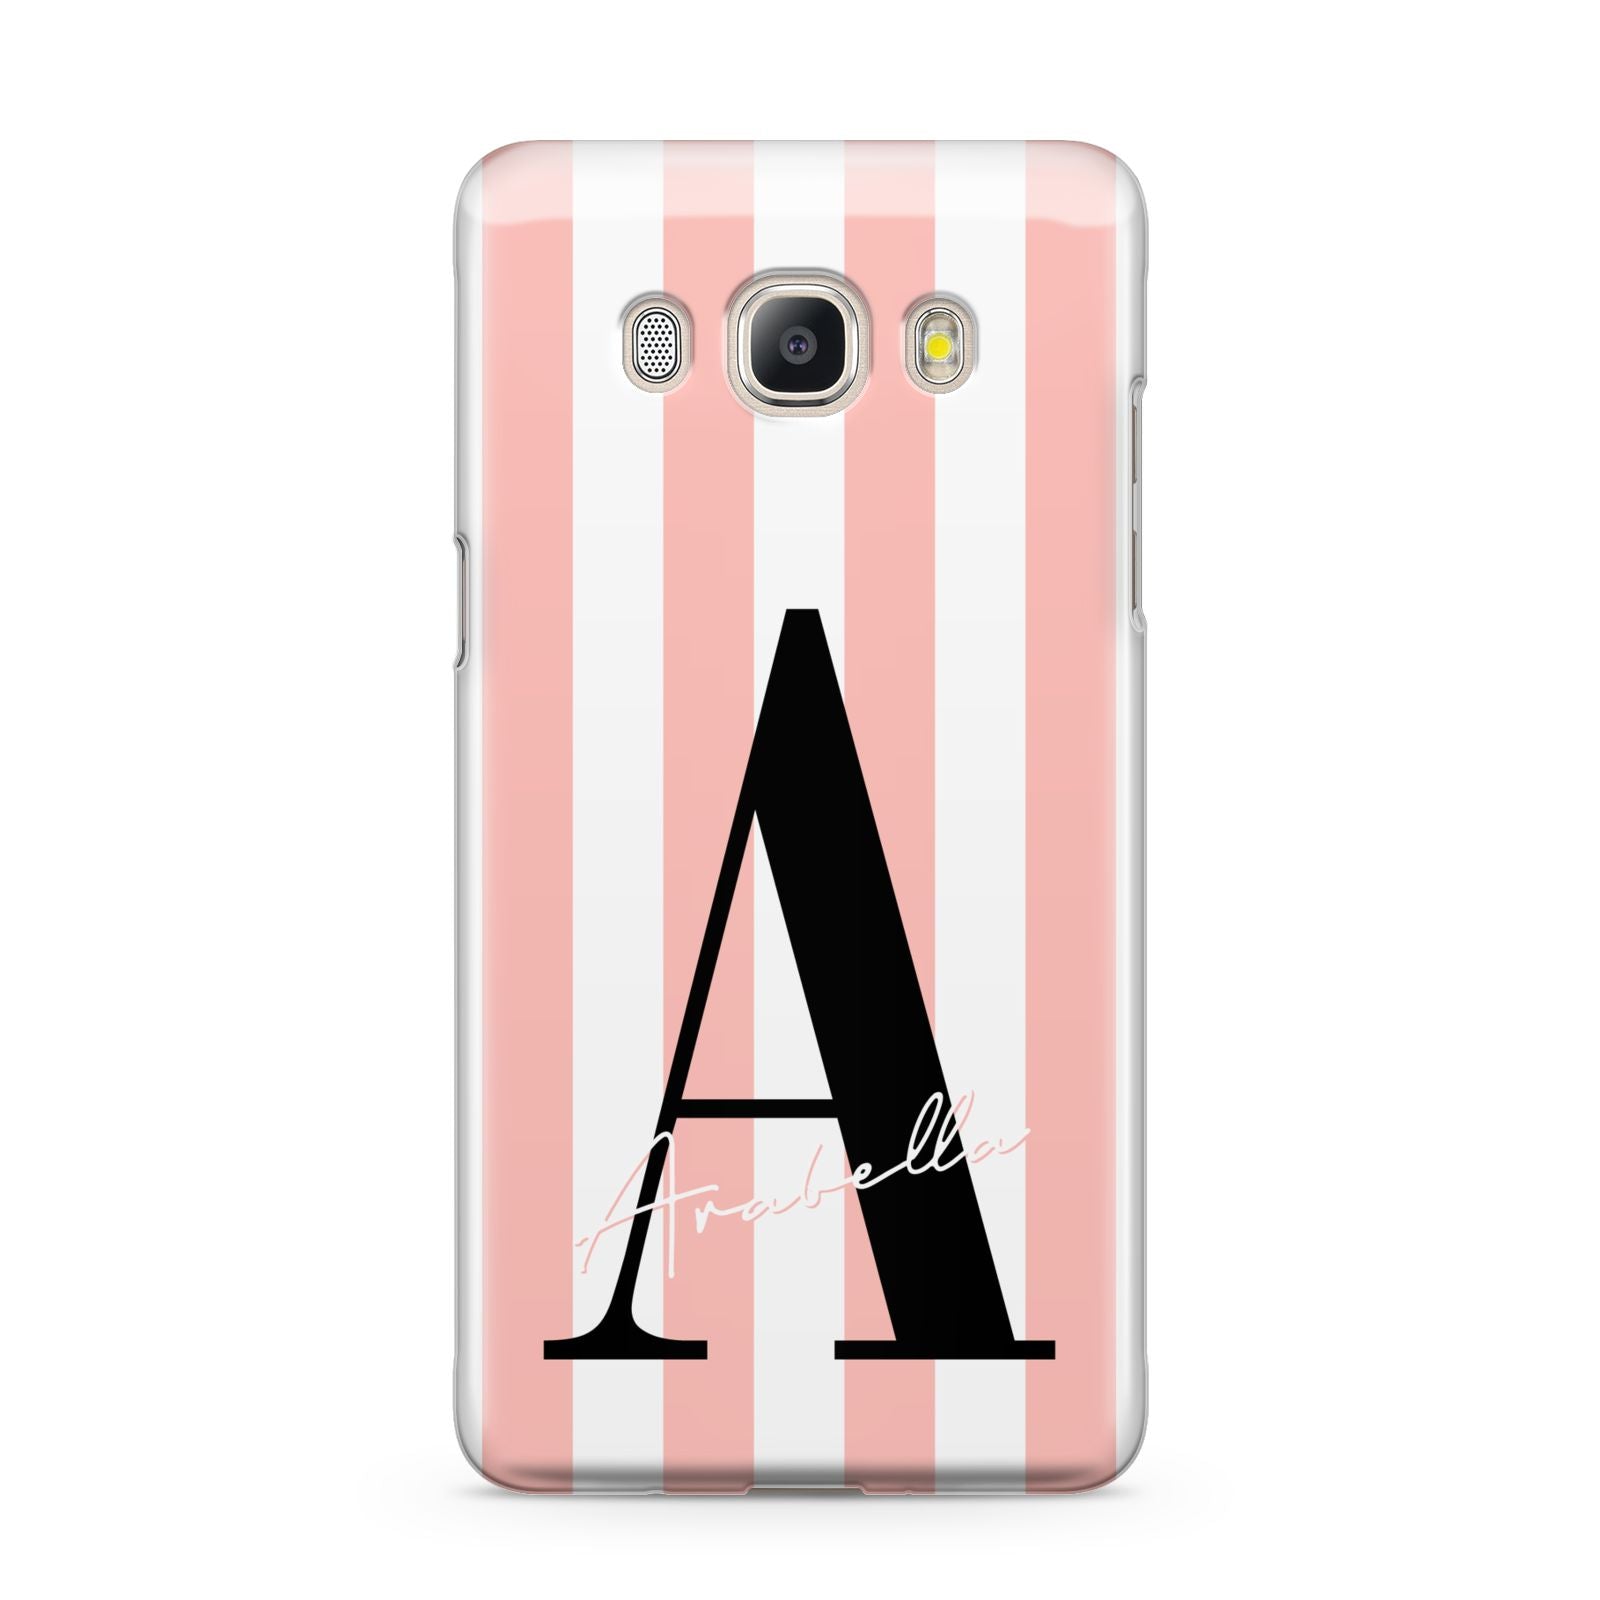 Personalised Pink Striped Initial Samsung Galaxy J5 2016 Case